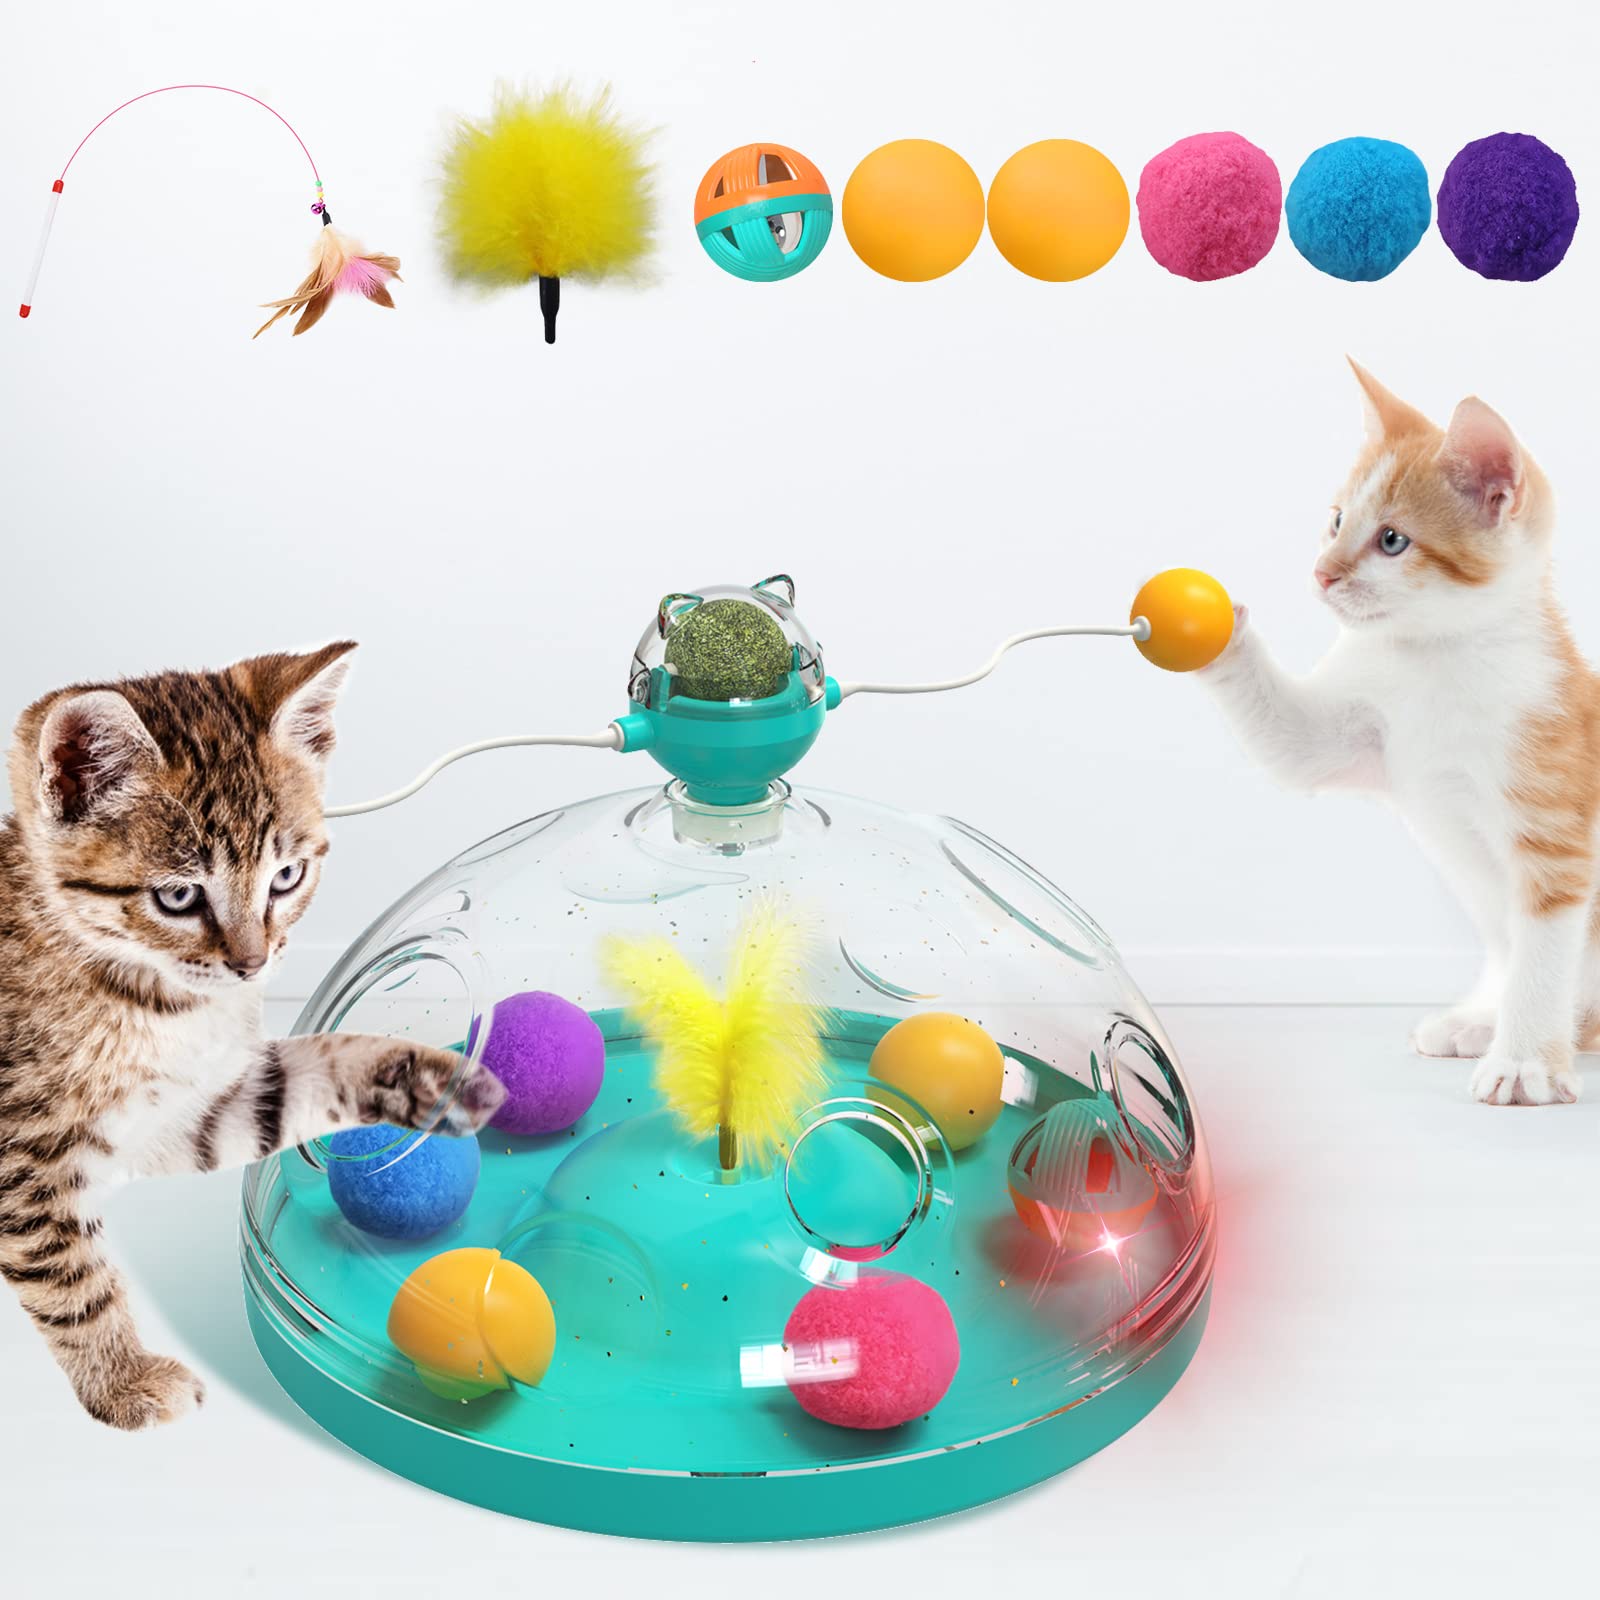 Purr-fect Playtime: Interactive Cat Toy for Endless Fun插图4